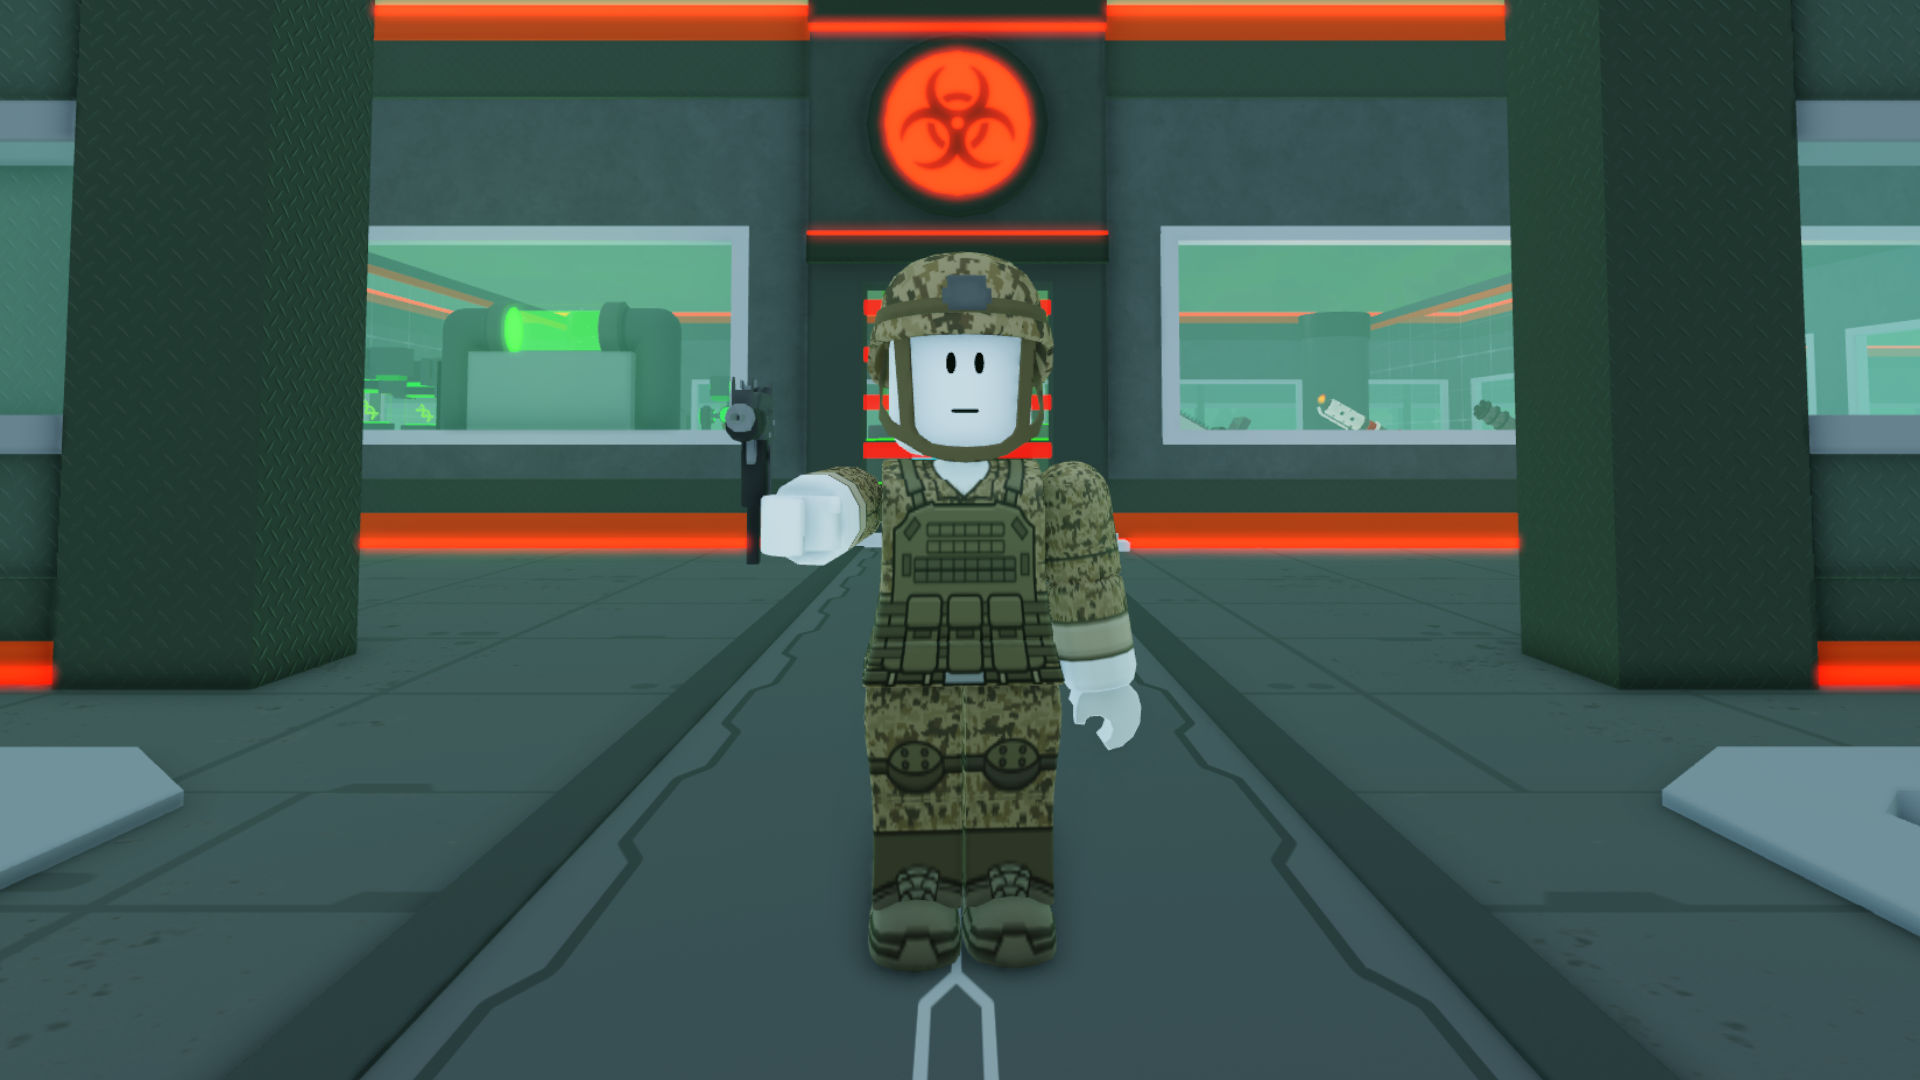 All Secret military war tycoon Codes 2023  Codes for military war tycoon  2023 - Roblox Code 